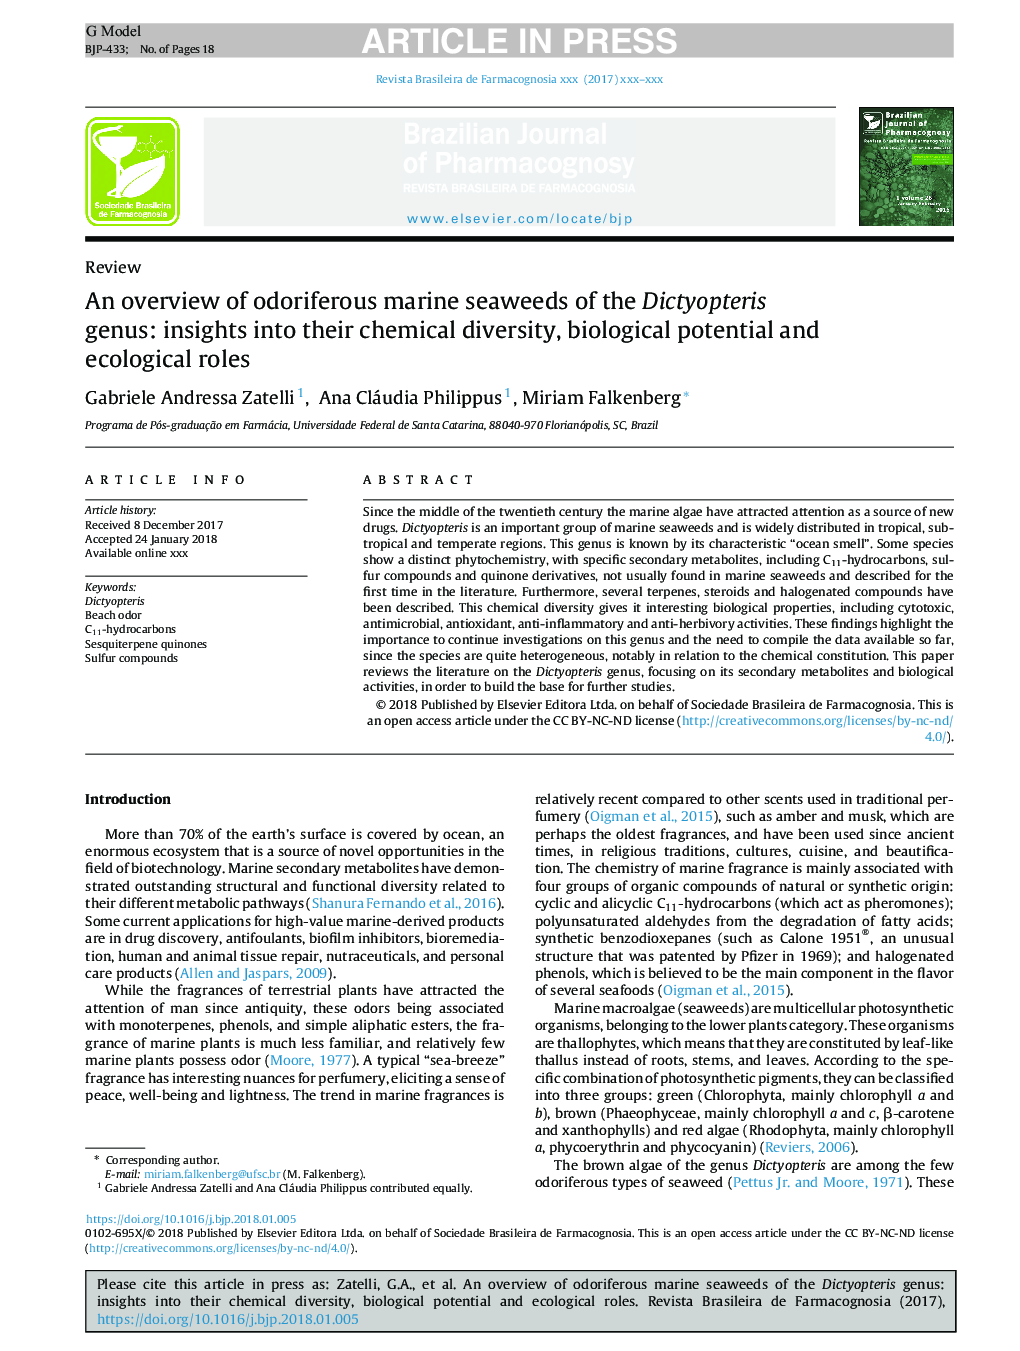 An overview of odoriferous marine seaweeds of the Dictyopteris genus: insights into their chemical diversity, biological potential and ecological roles